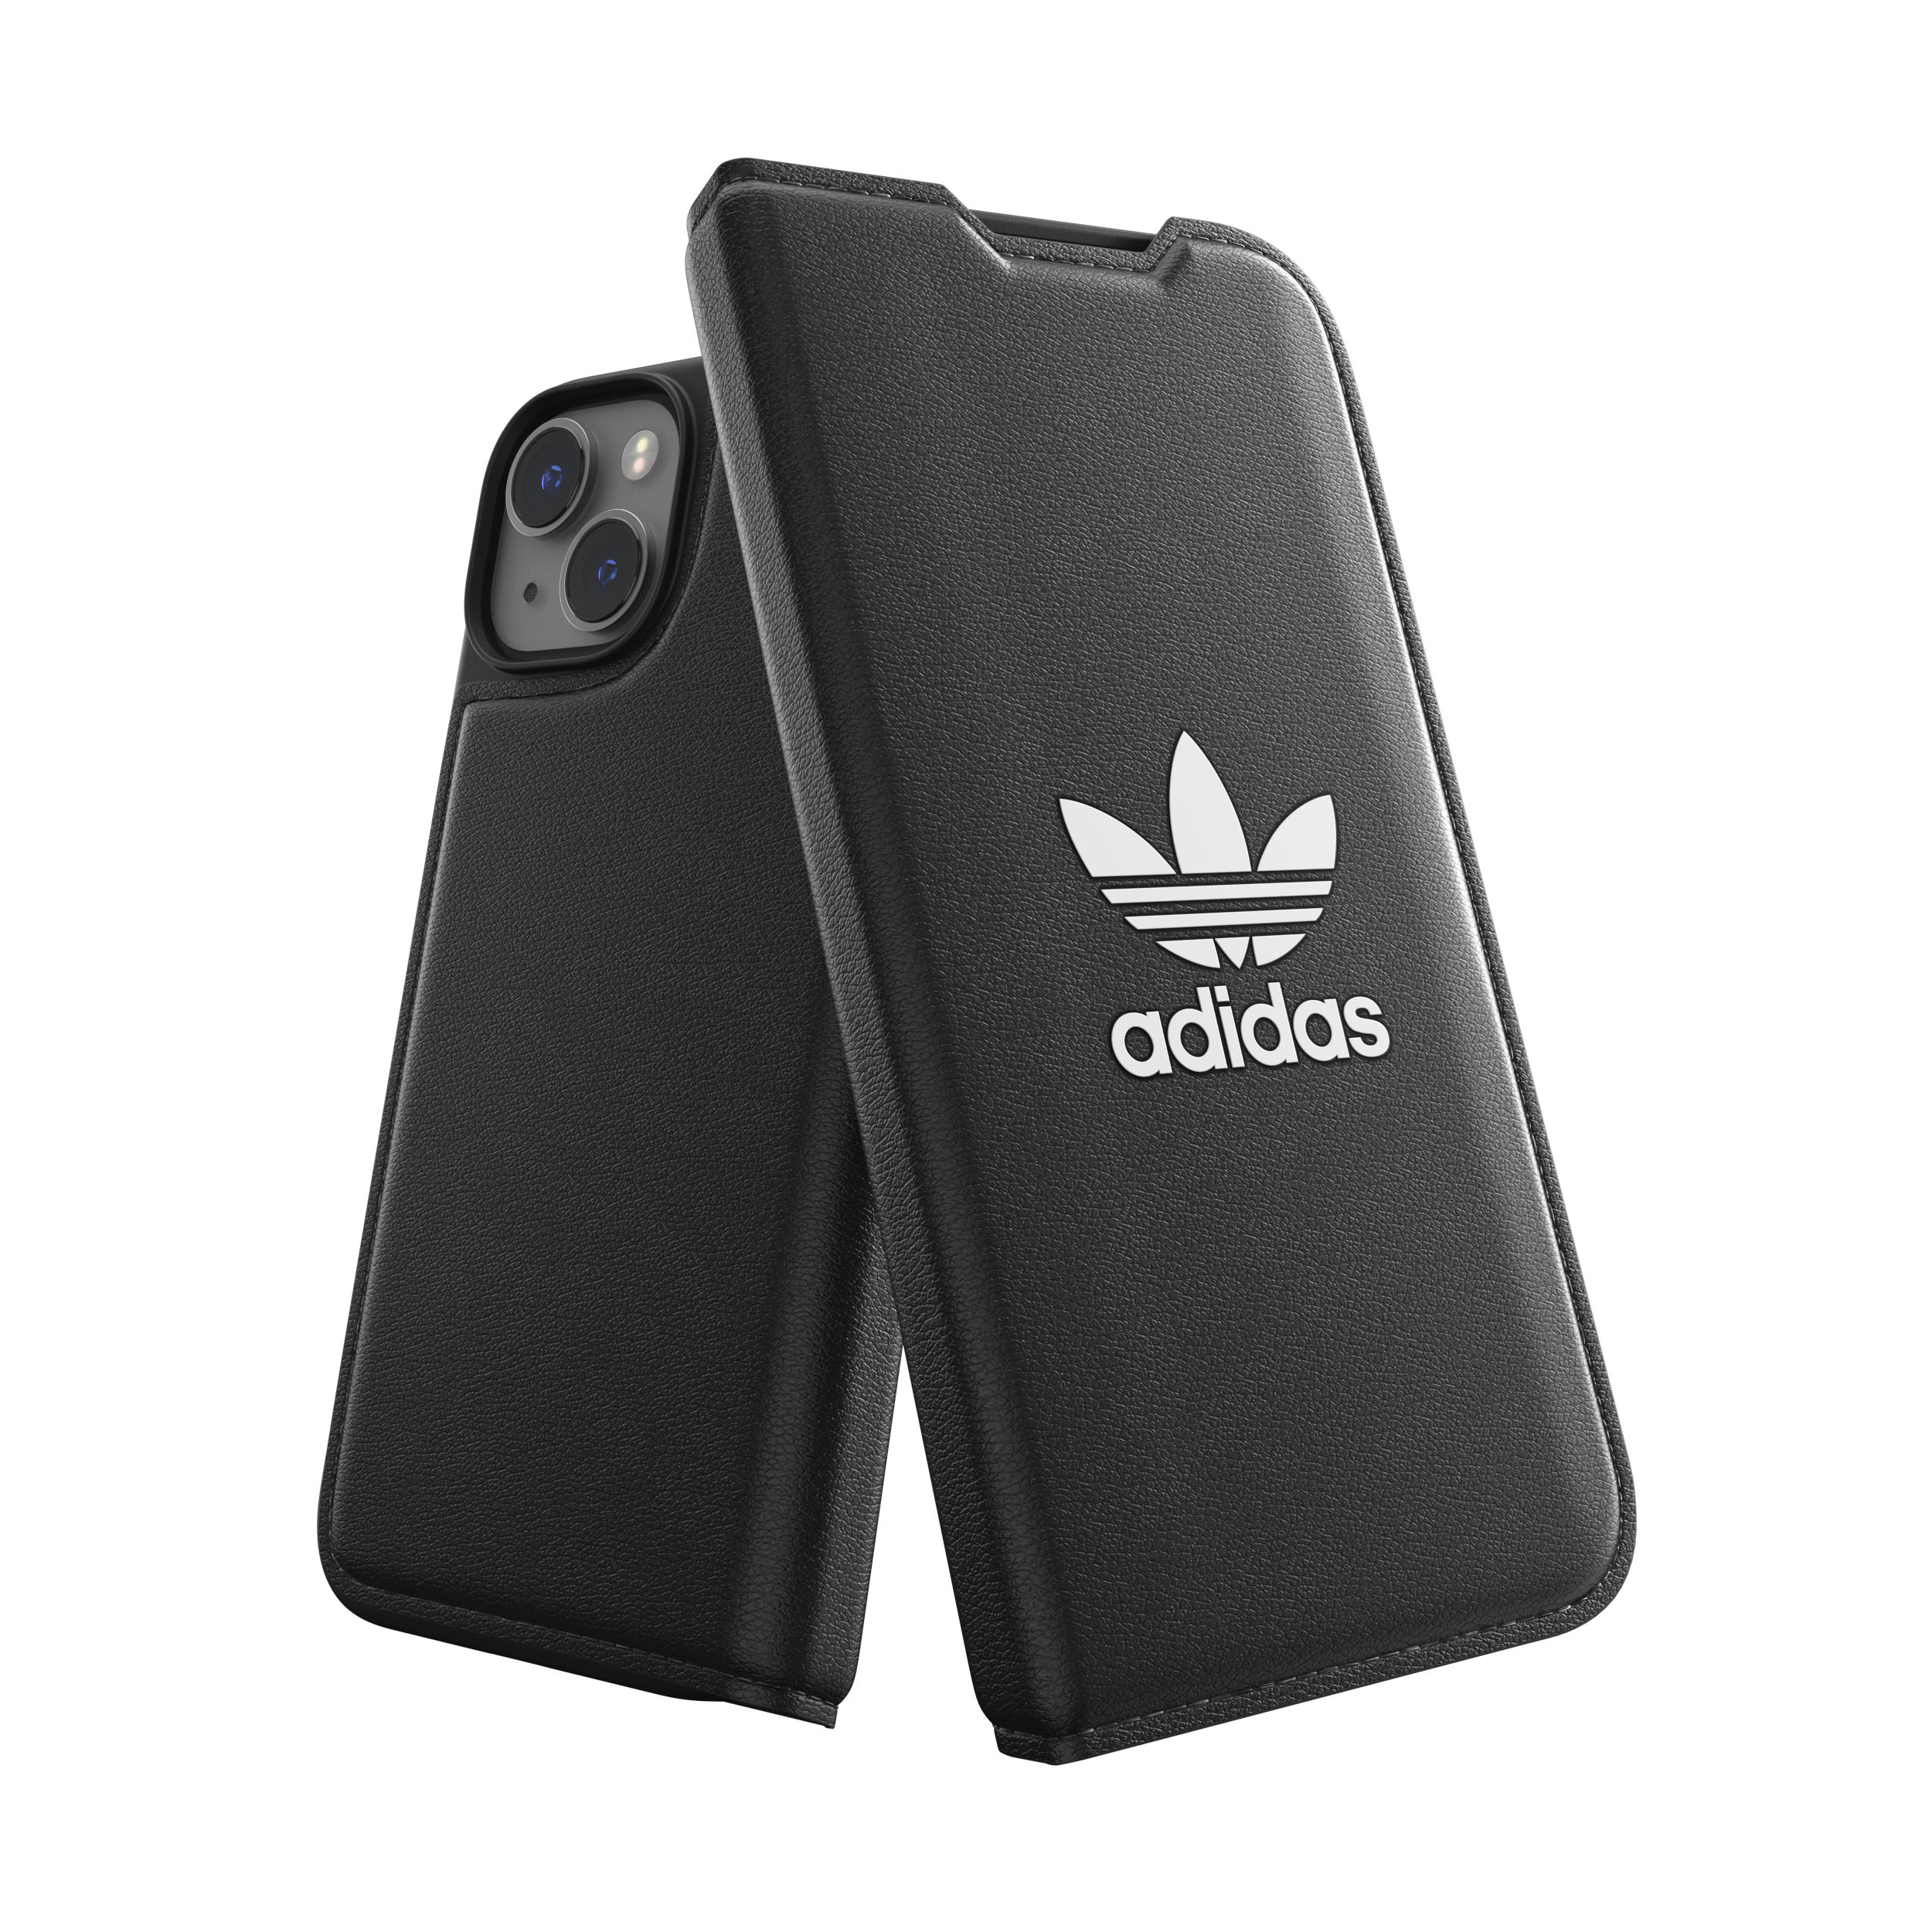 Case Booklet Bookcover, IPHONE BASIC, BLACK 14, ADIDAS APPLE,